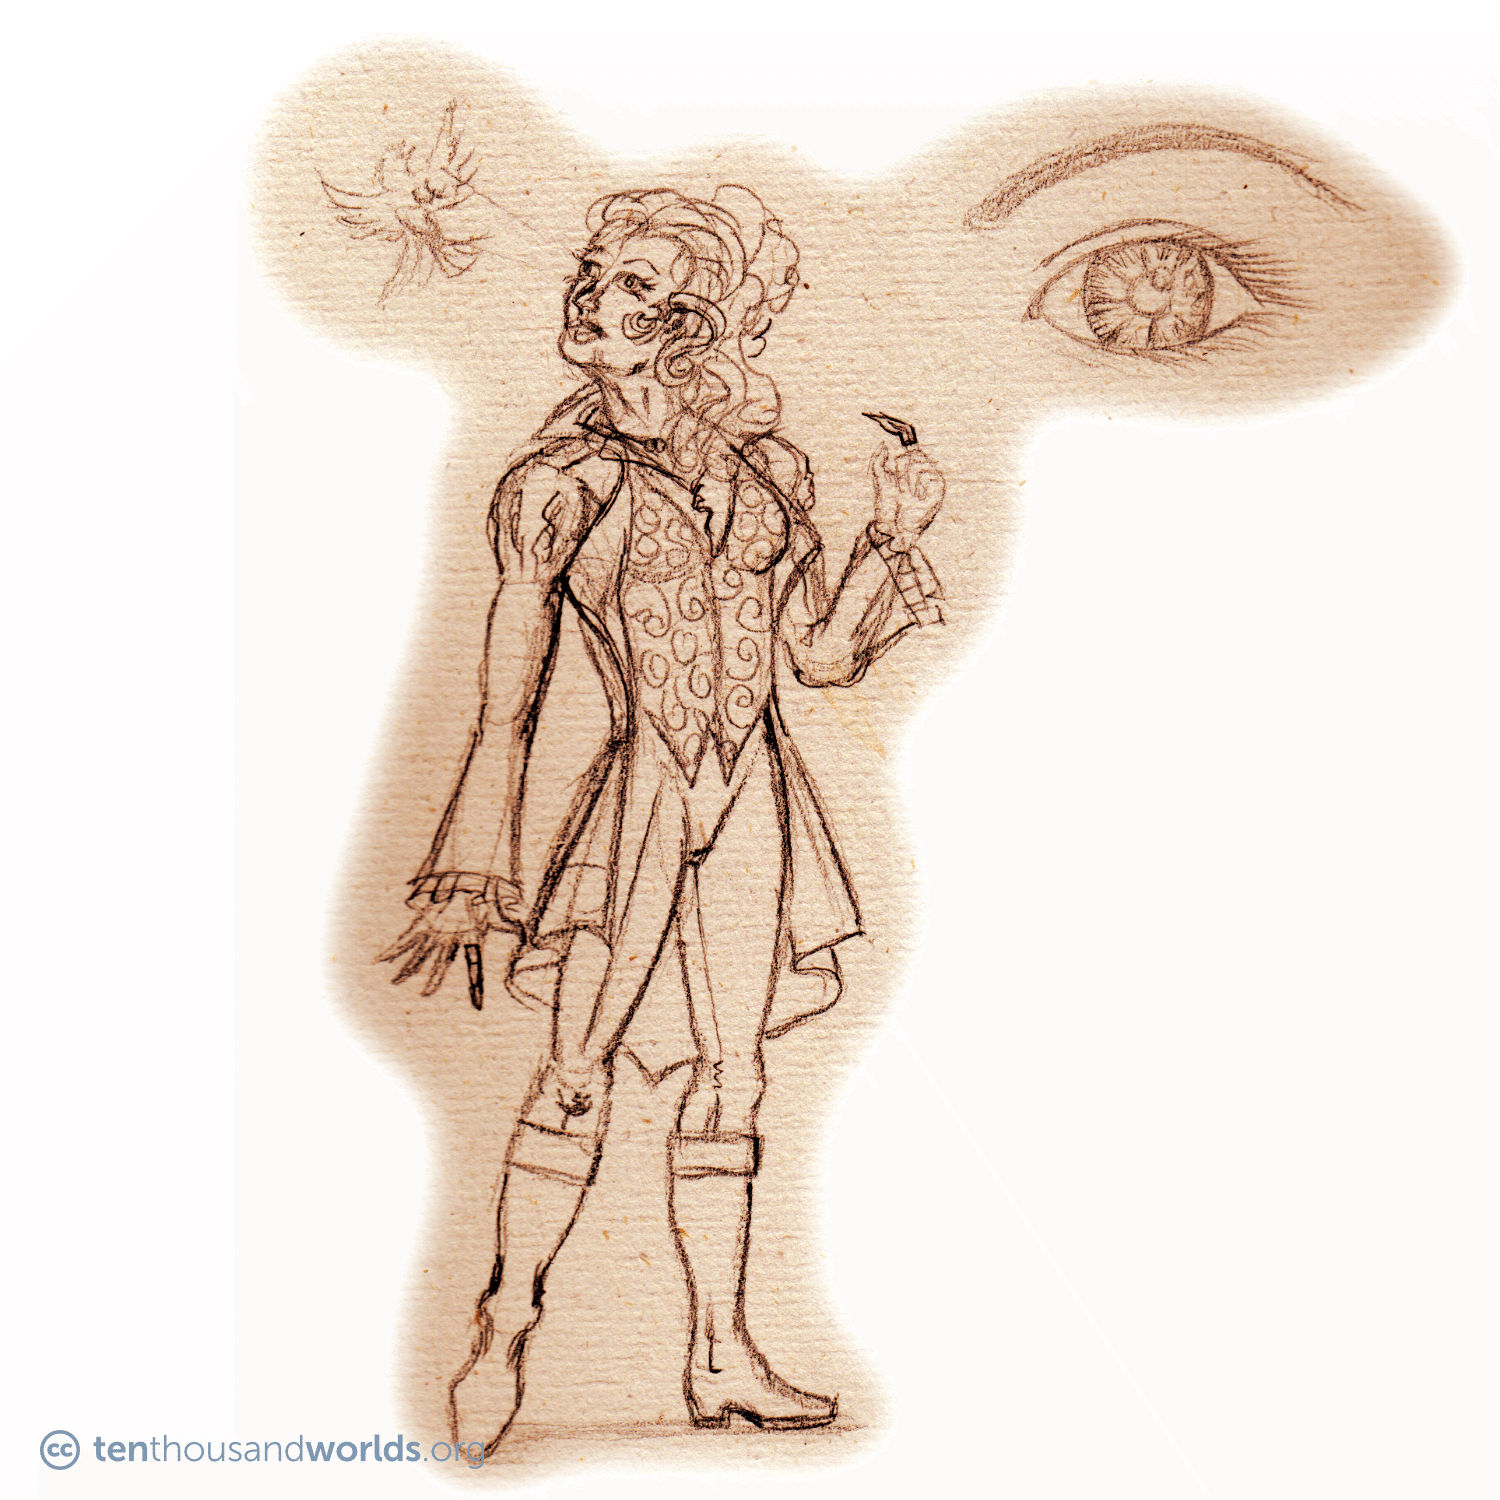 A pencil sketch of a woman dressed in romantic, traditionally male-inspired clothing: riding boots, trousers, a heavily-embroidered waistcoat, plus a frock coat with puffy shoulders and traditionally feminine details. Her left index finger is sheathed in a metal claw. Light projects from her synthetic eyes to form the hologram of a bird in flight. Nearby, a close-up of her right eye highlights its mechanical details.